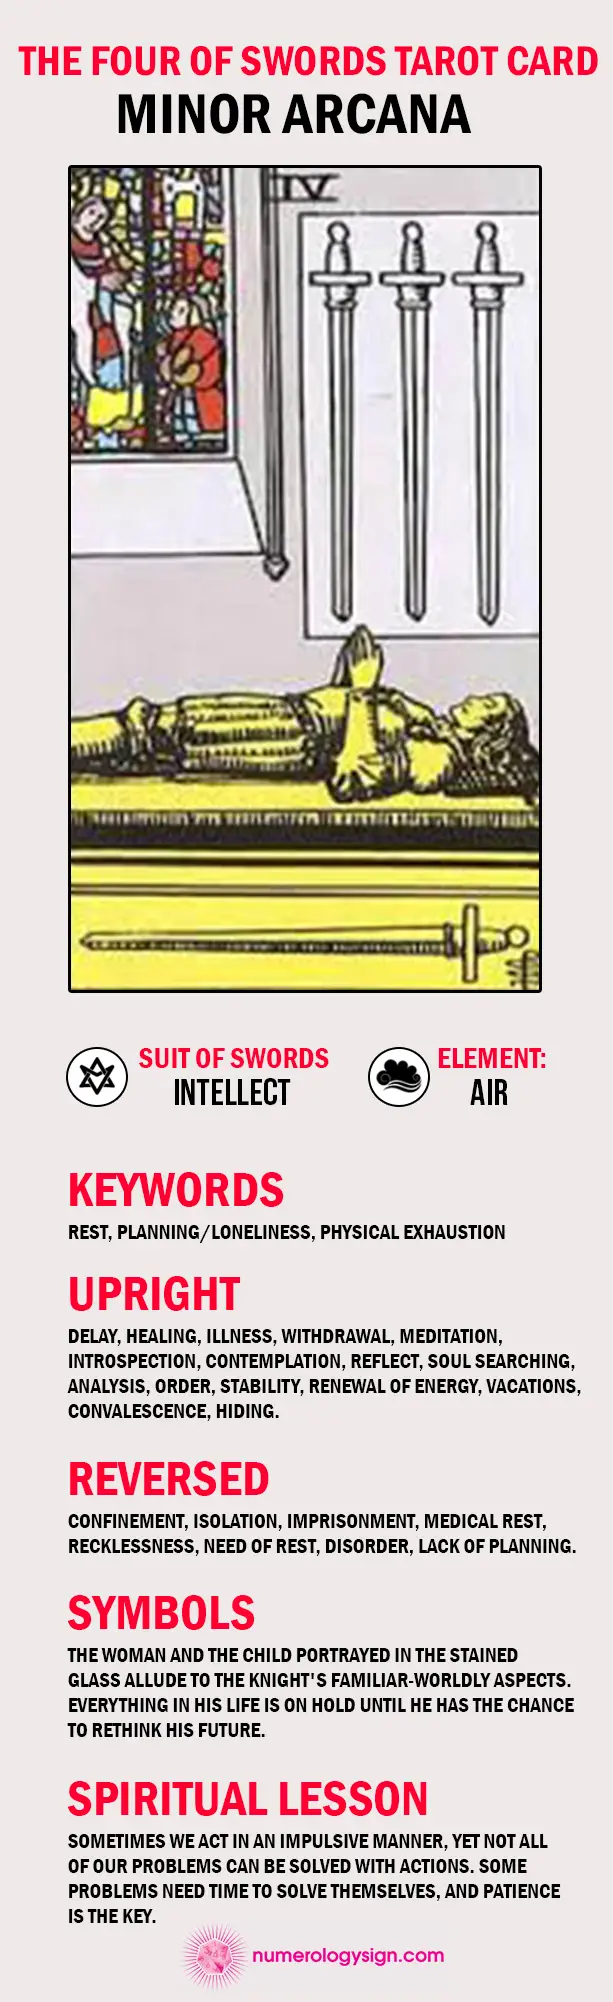 The Four of Swords Tarot Card Meaning Infographic - Minor Arcana